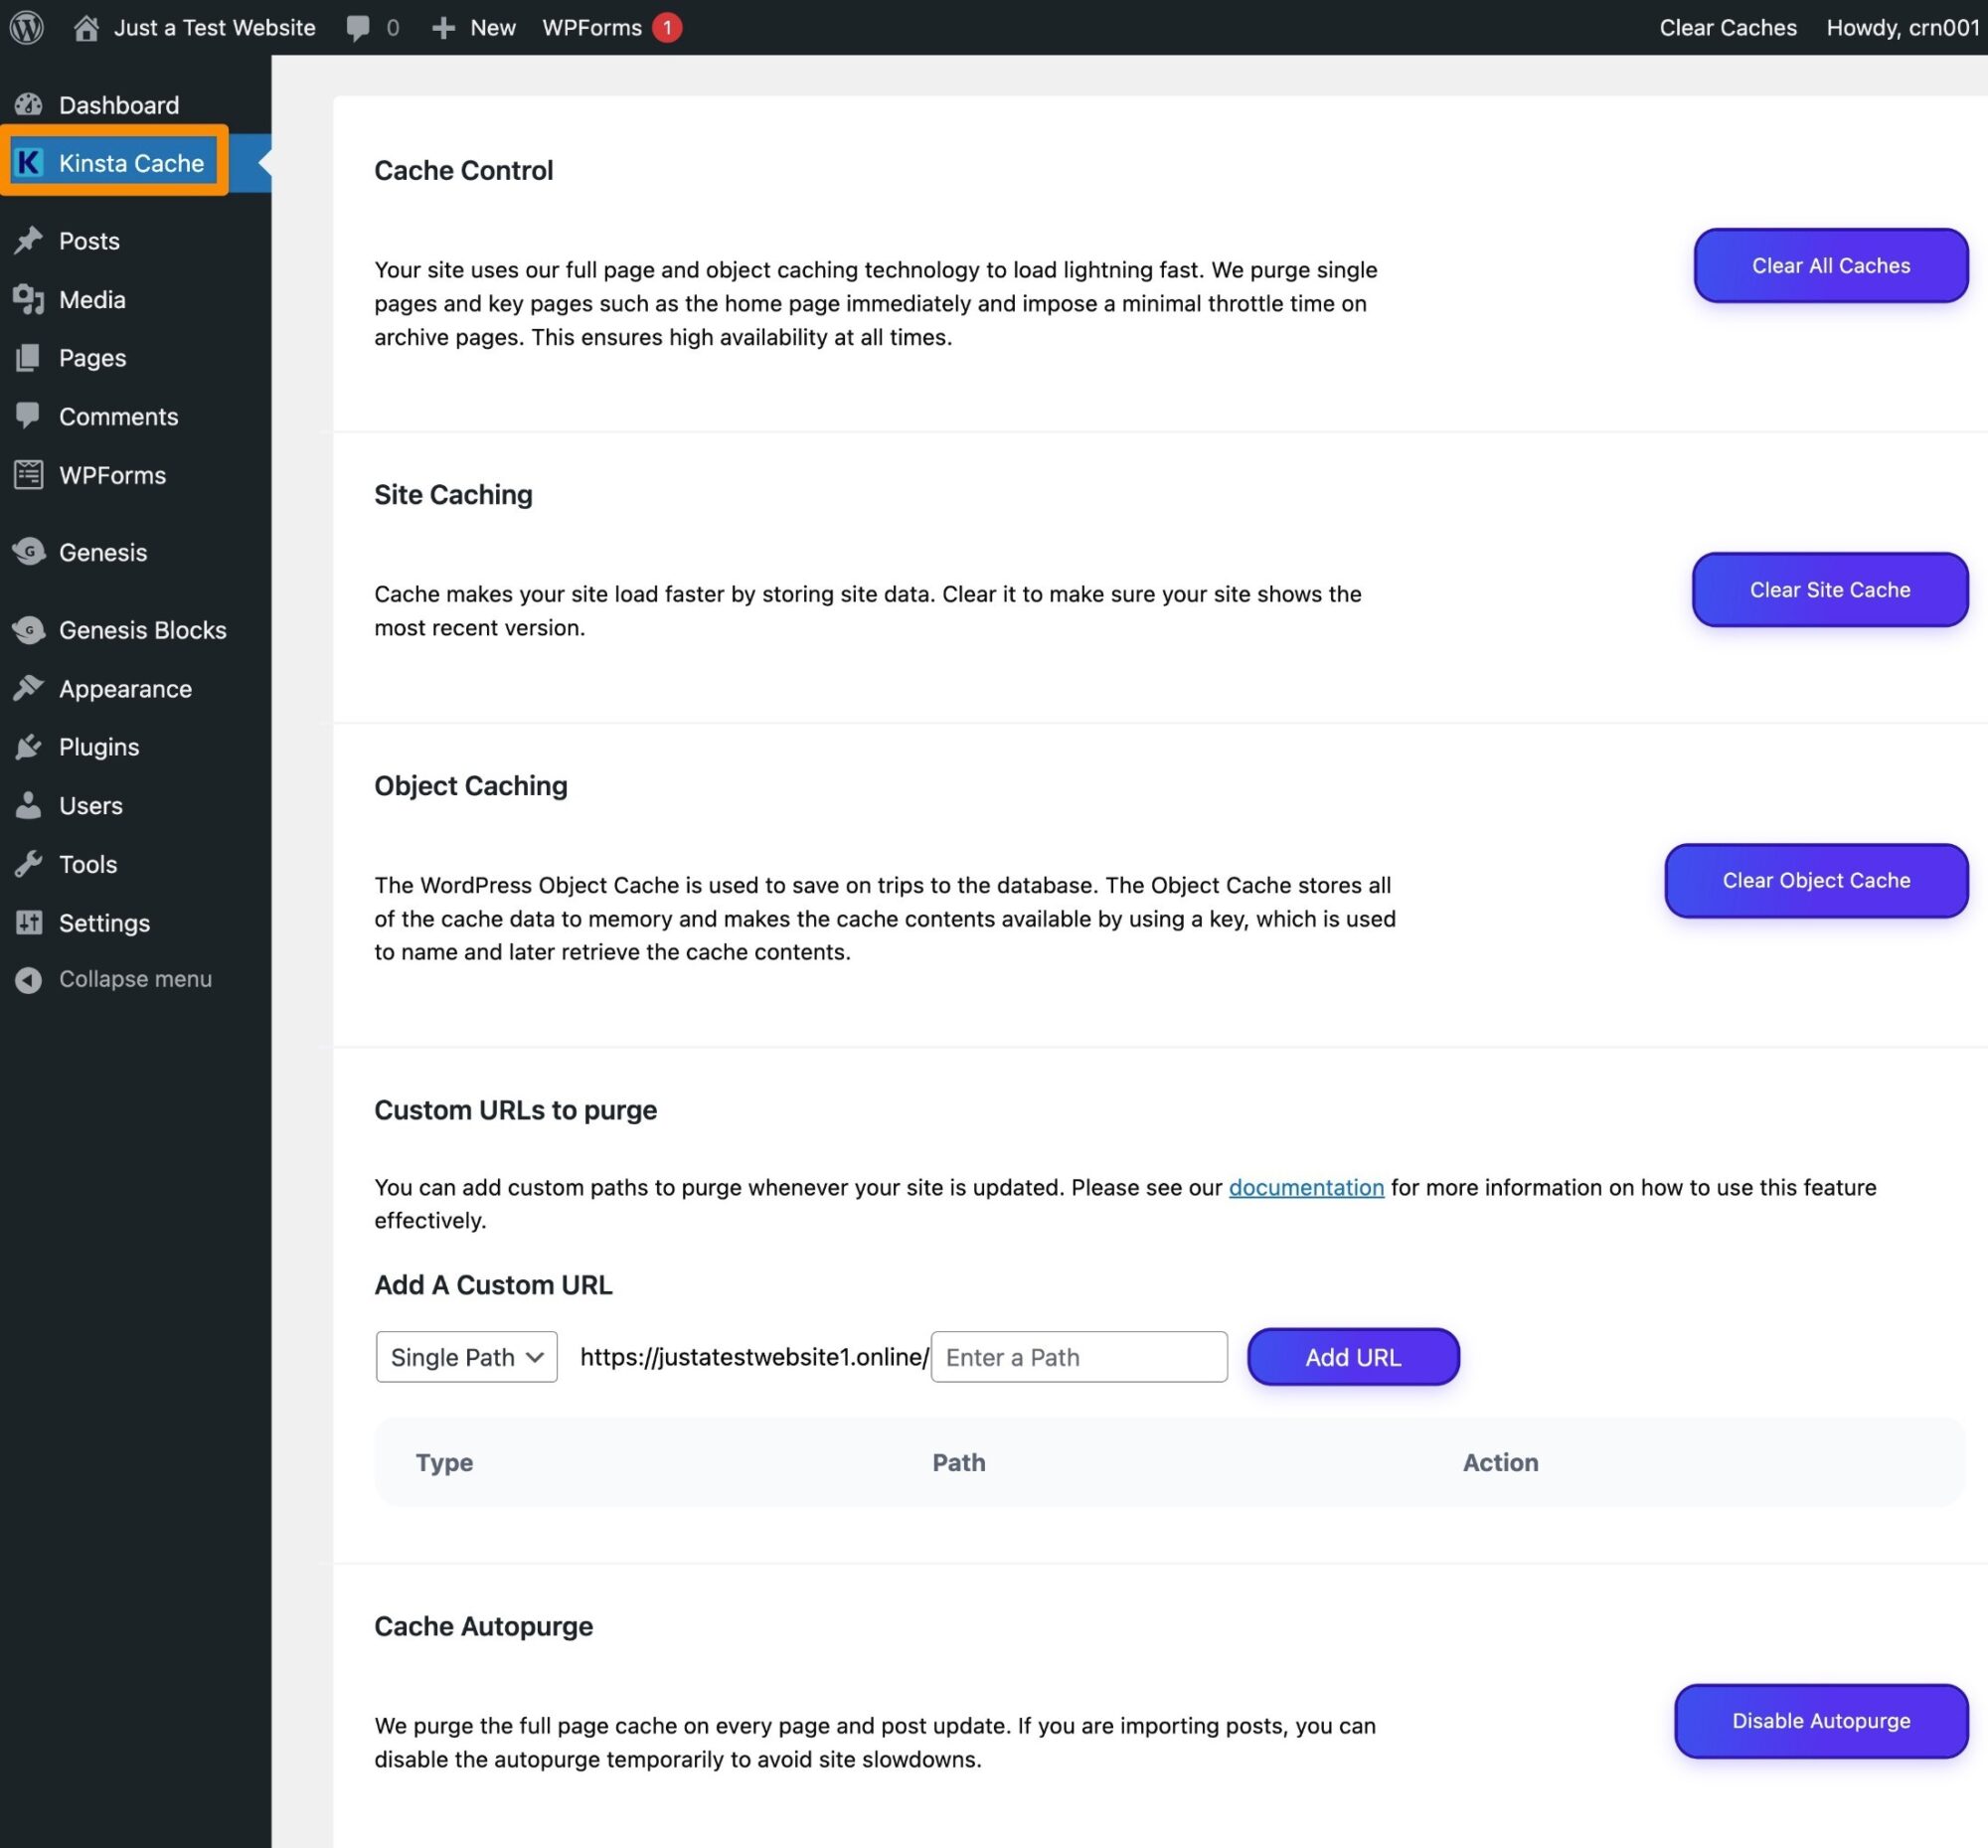 You can control the Kinsta cache from your WordPress dashboard.